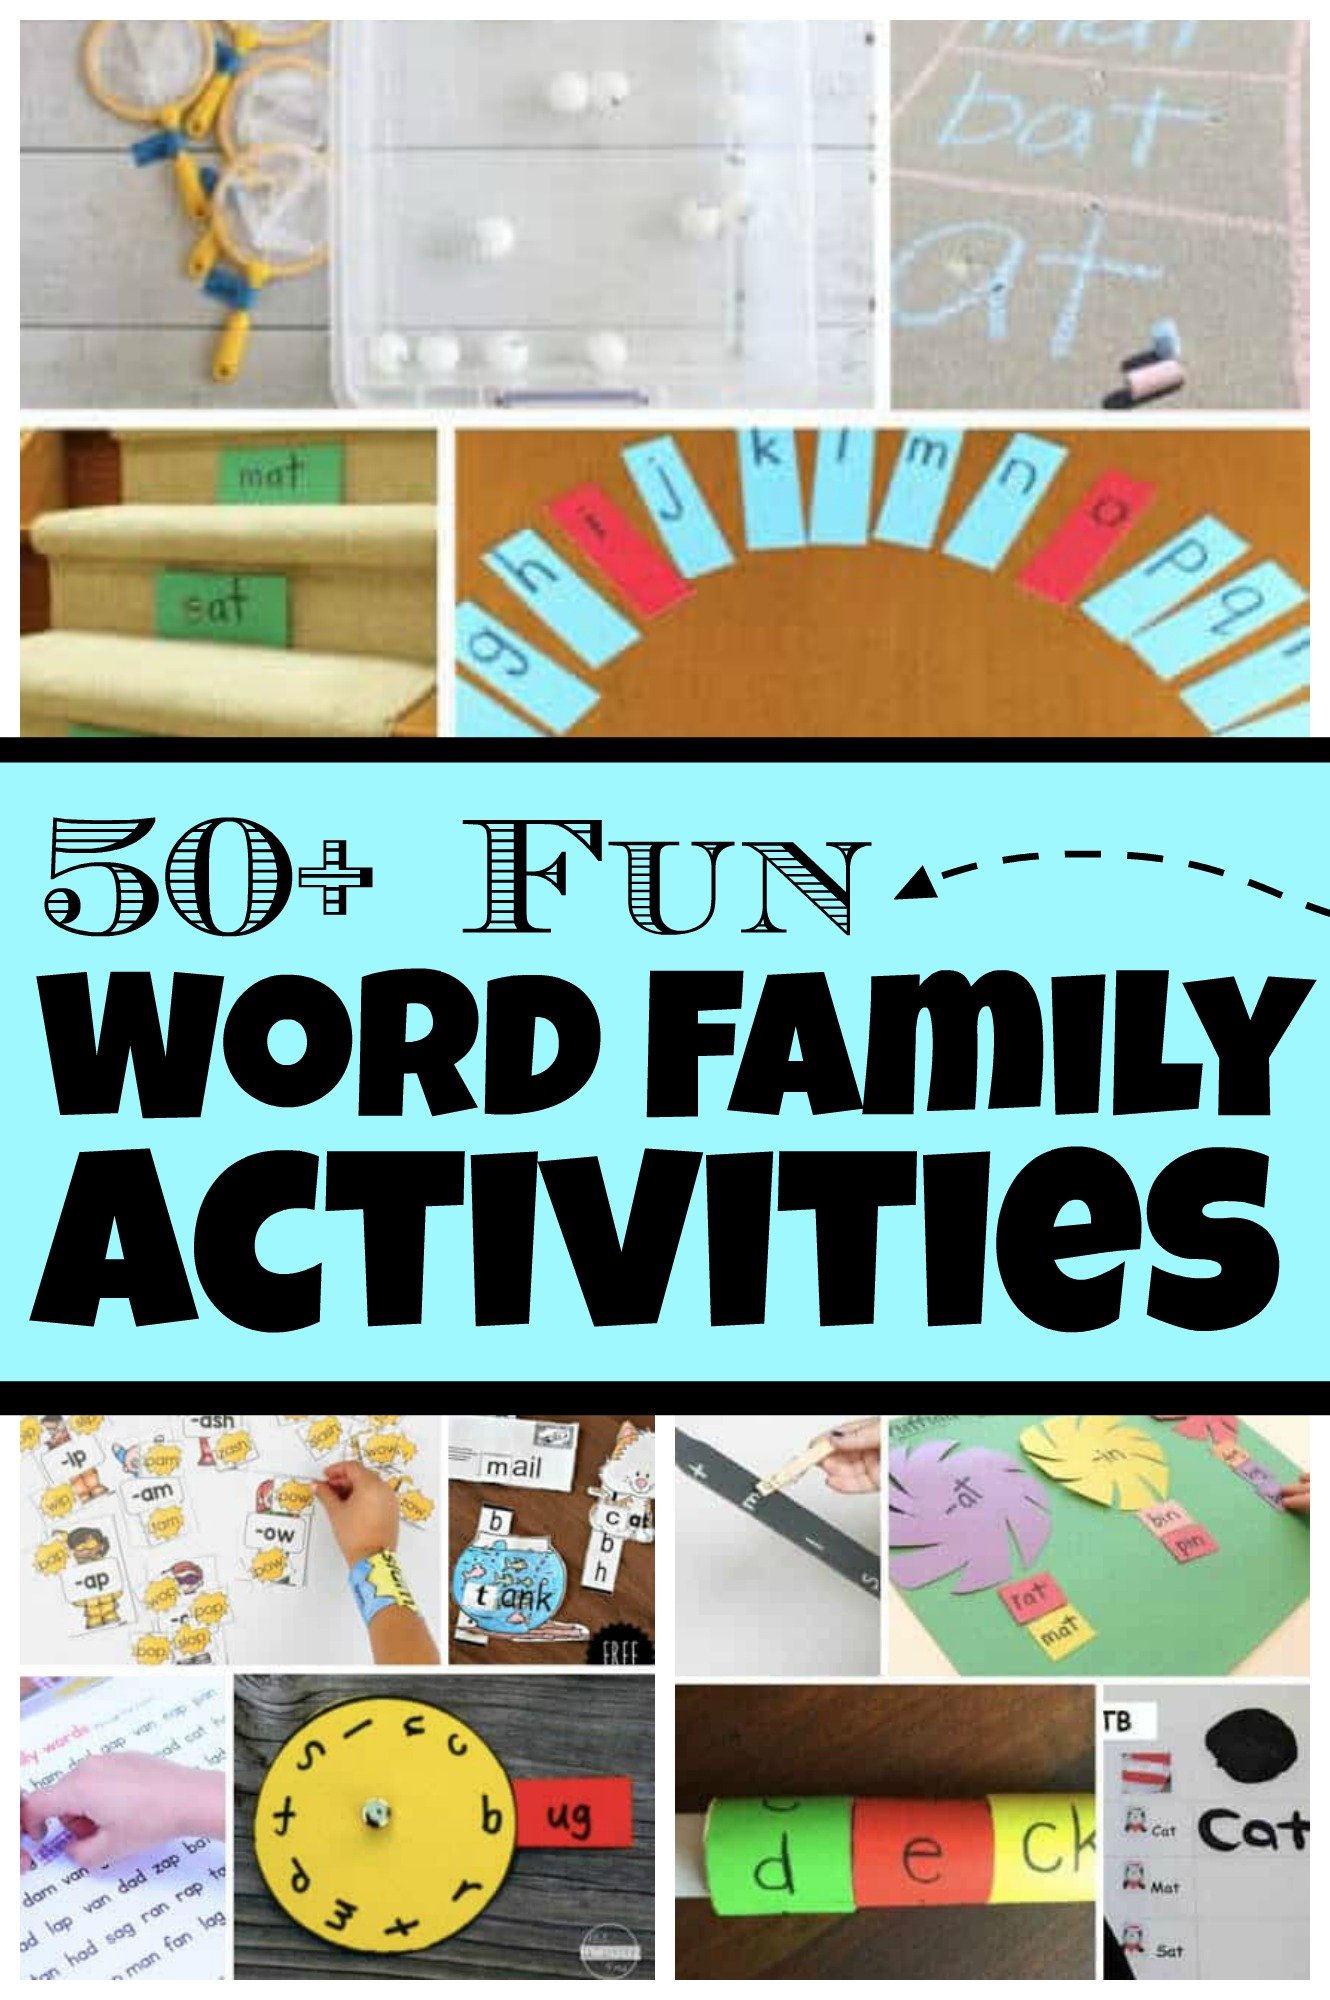 Fun word family games and activities